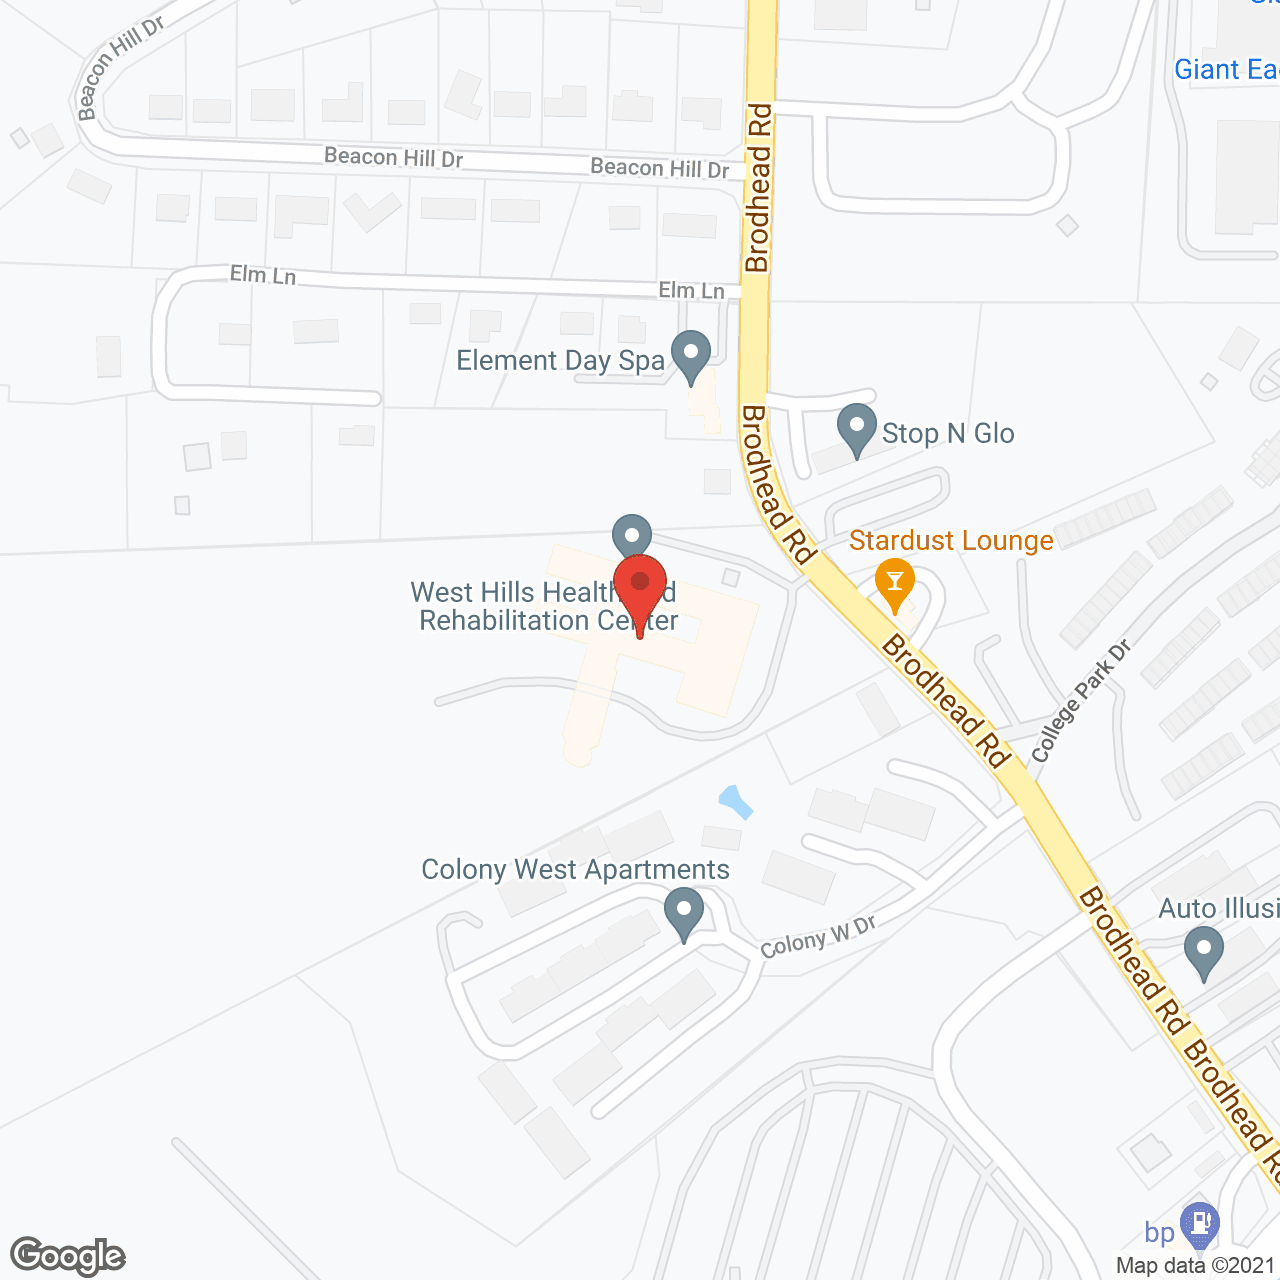 West Hills Health and Rehabilitation Center in google map